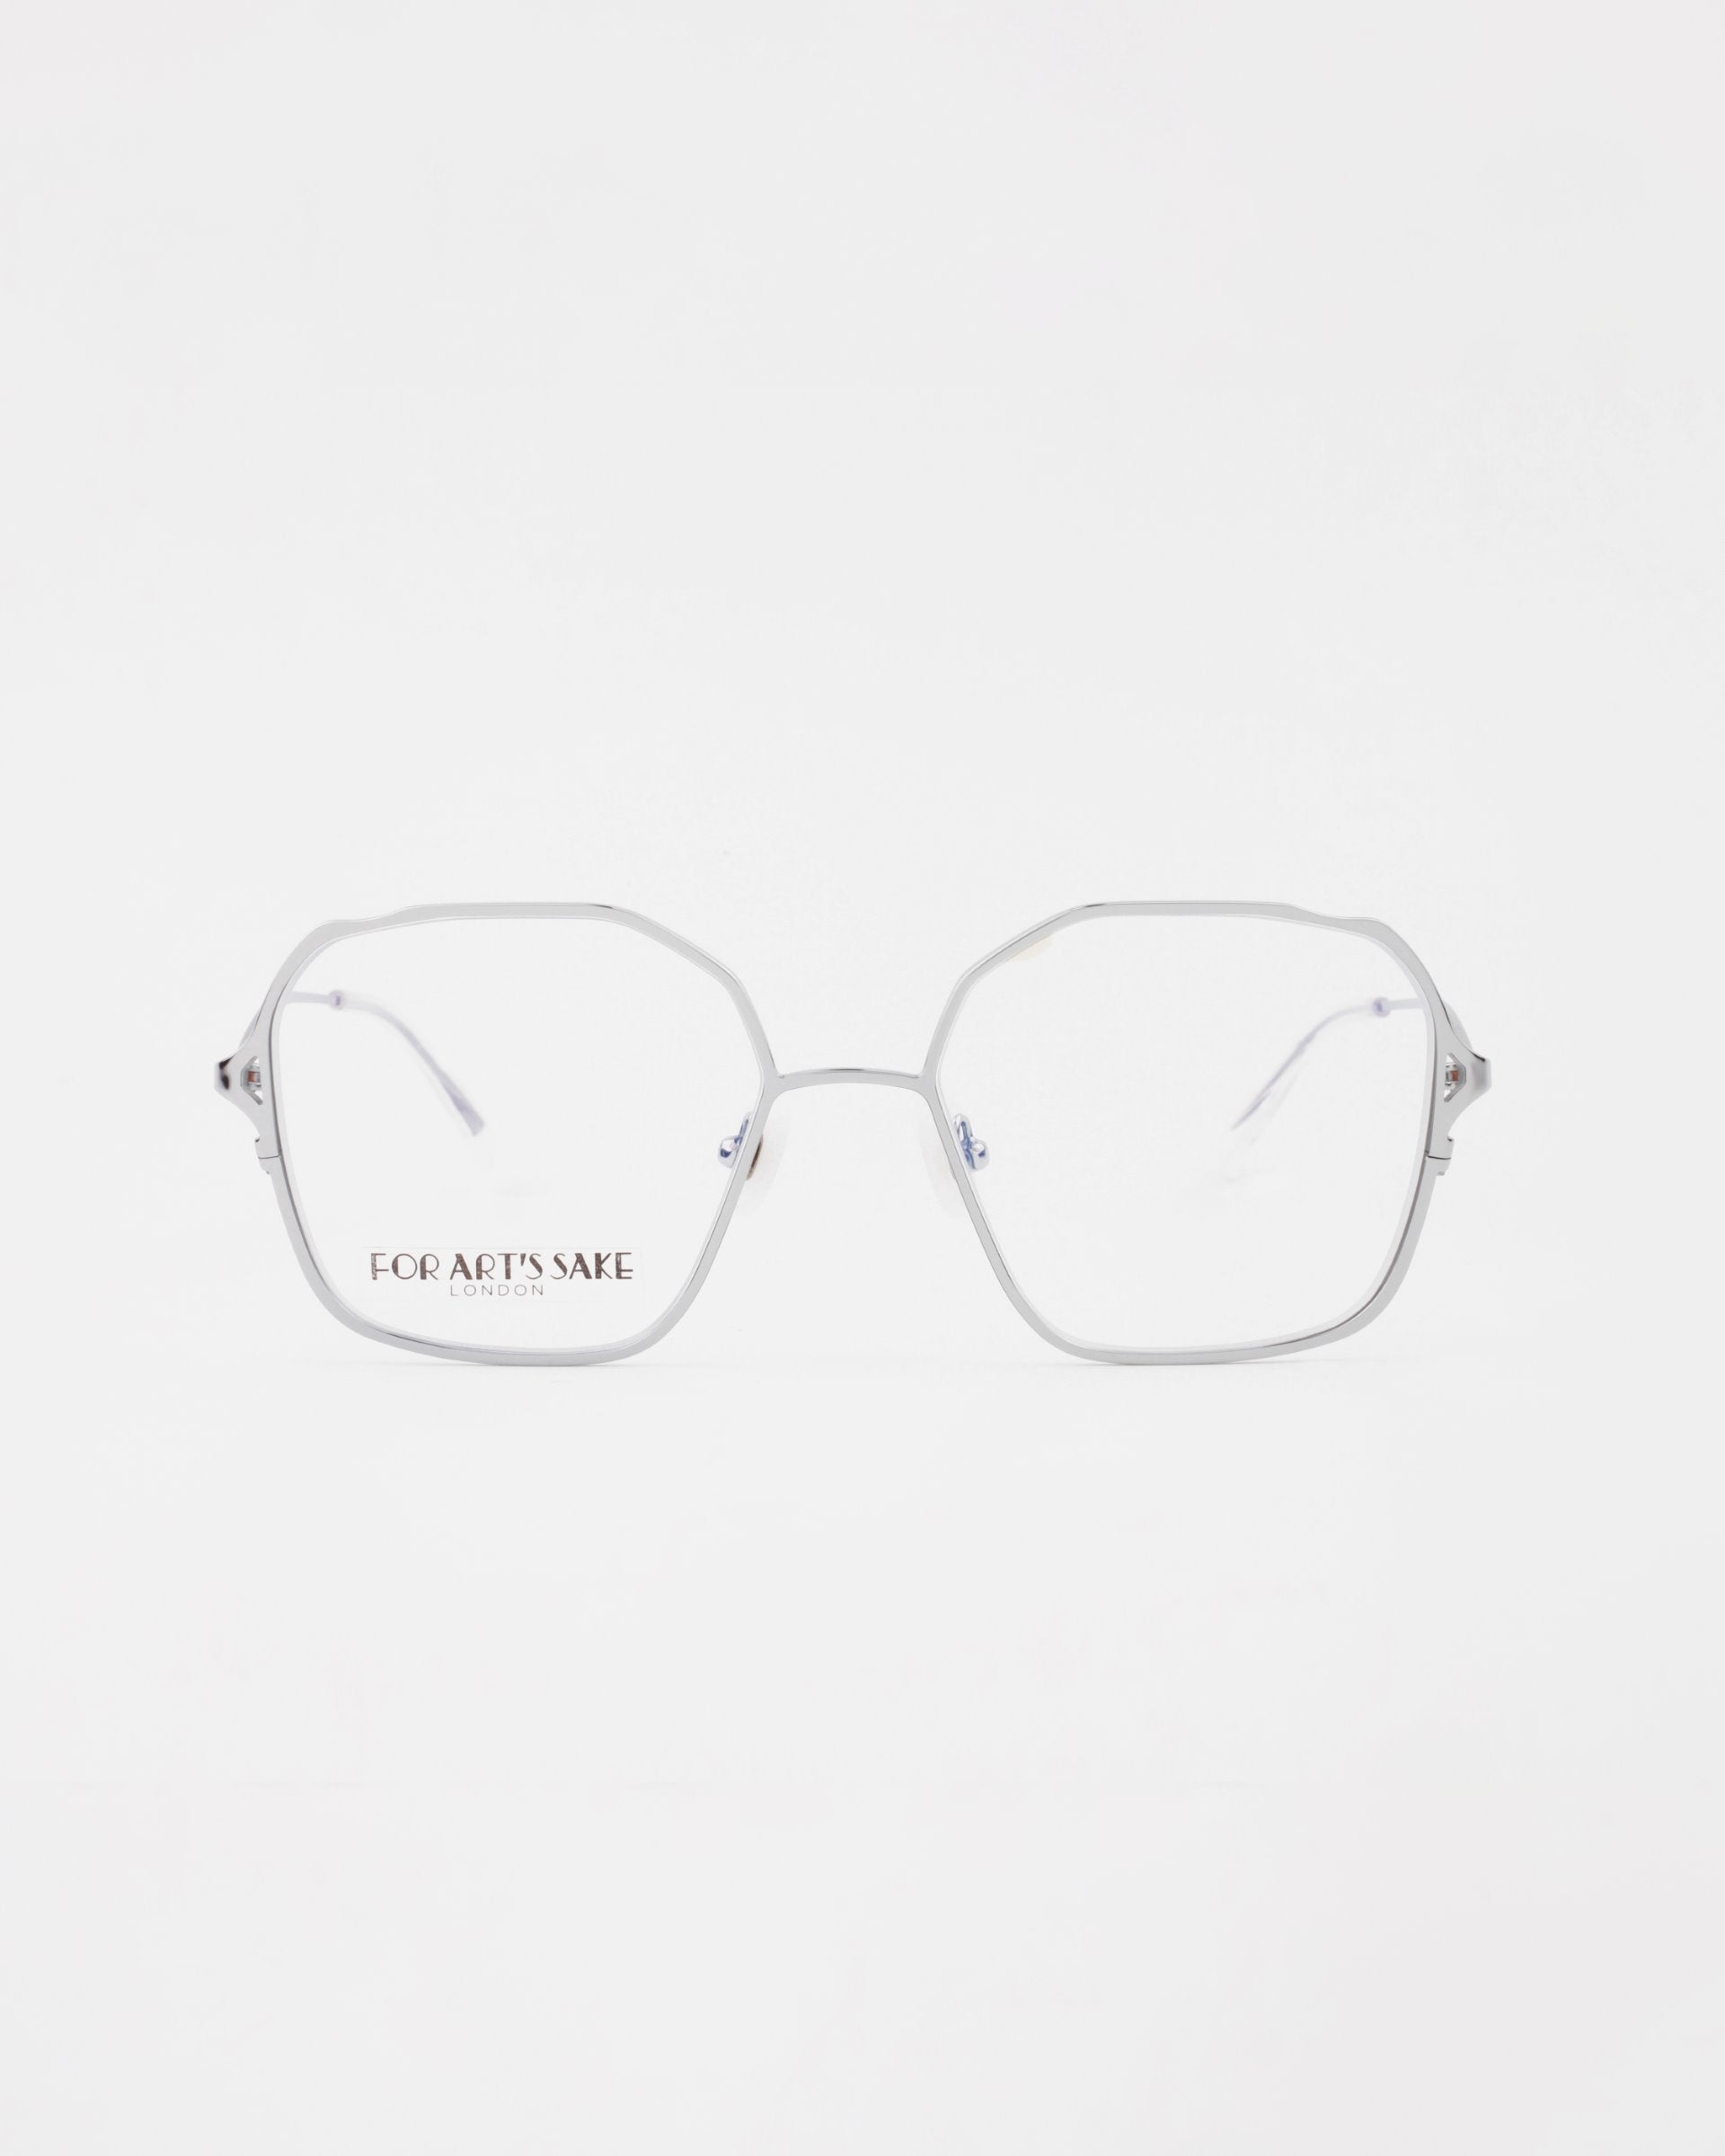 A pair of silver Mimi eyeglasses with octagonal frames and clear lenses, featuring an 18-karat gold-plated bridge, set against a plain white background. The brand name &quot;FOR ART&#39;S SAKE&quot; is printed on the left lens in black letters. The glasses are available with a prescription service.